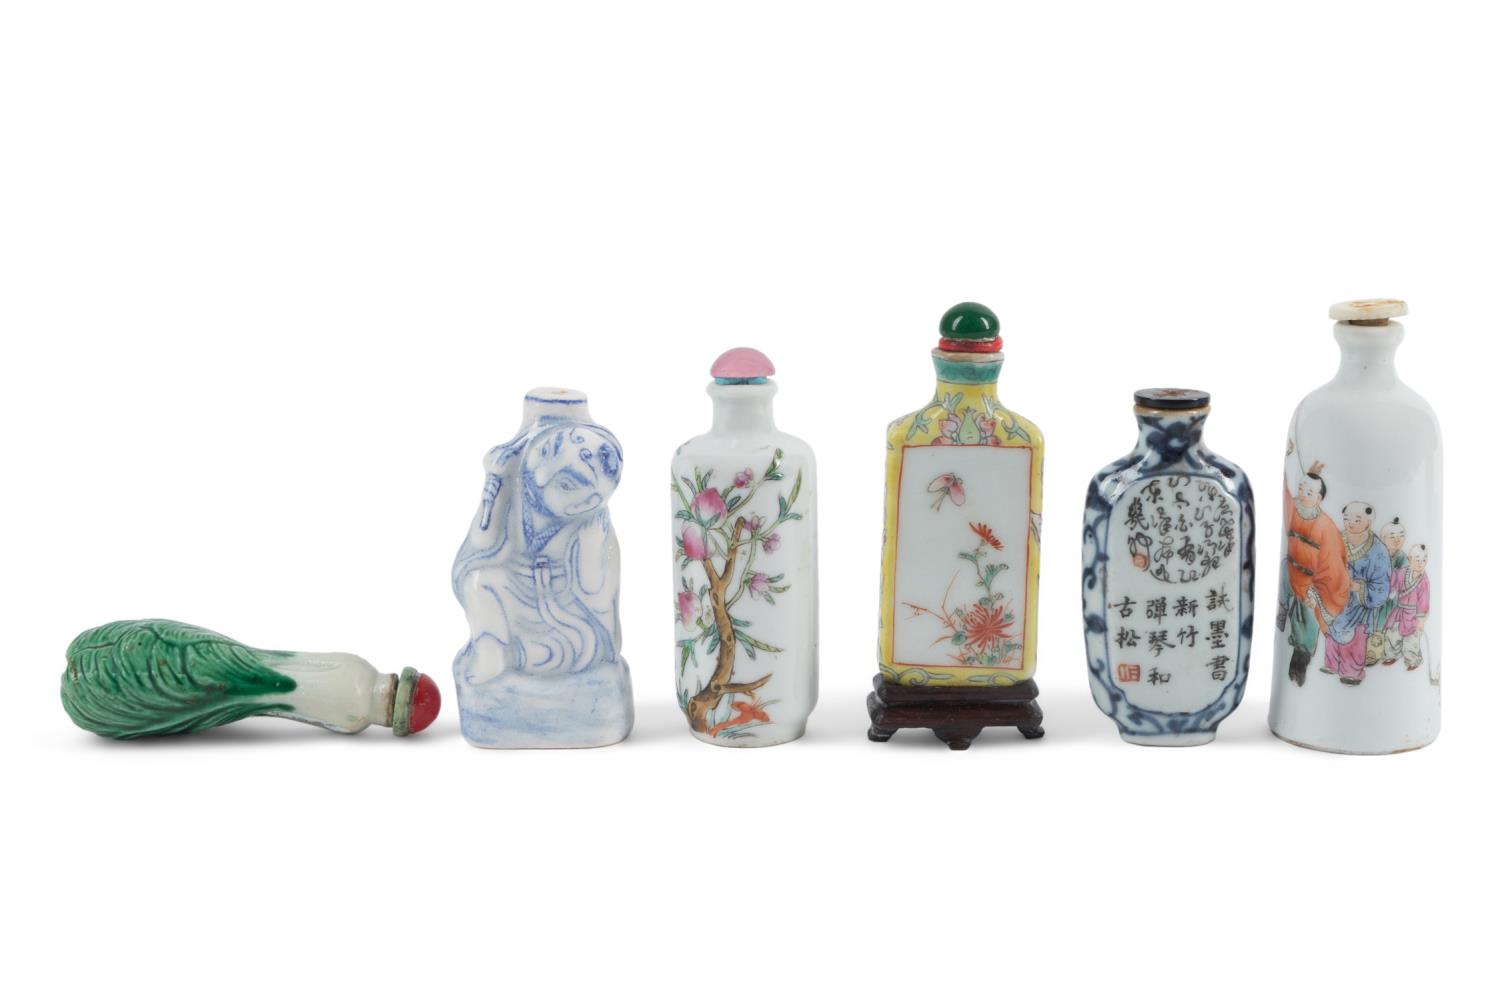 SIX CHINESE PORCELAIN SNUFF BOTTLES 2f958a